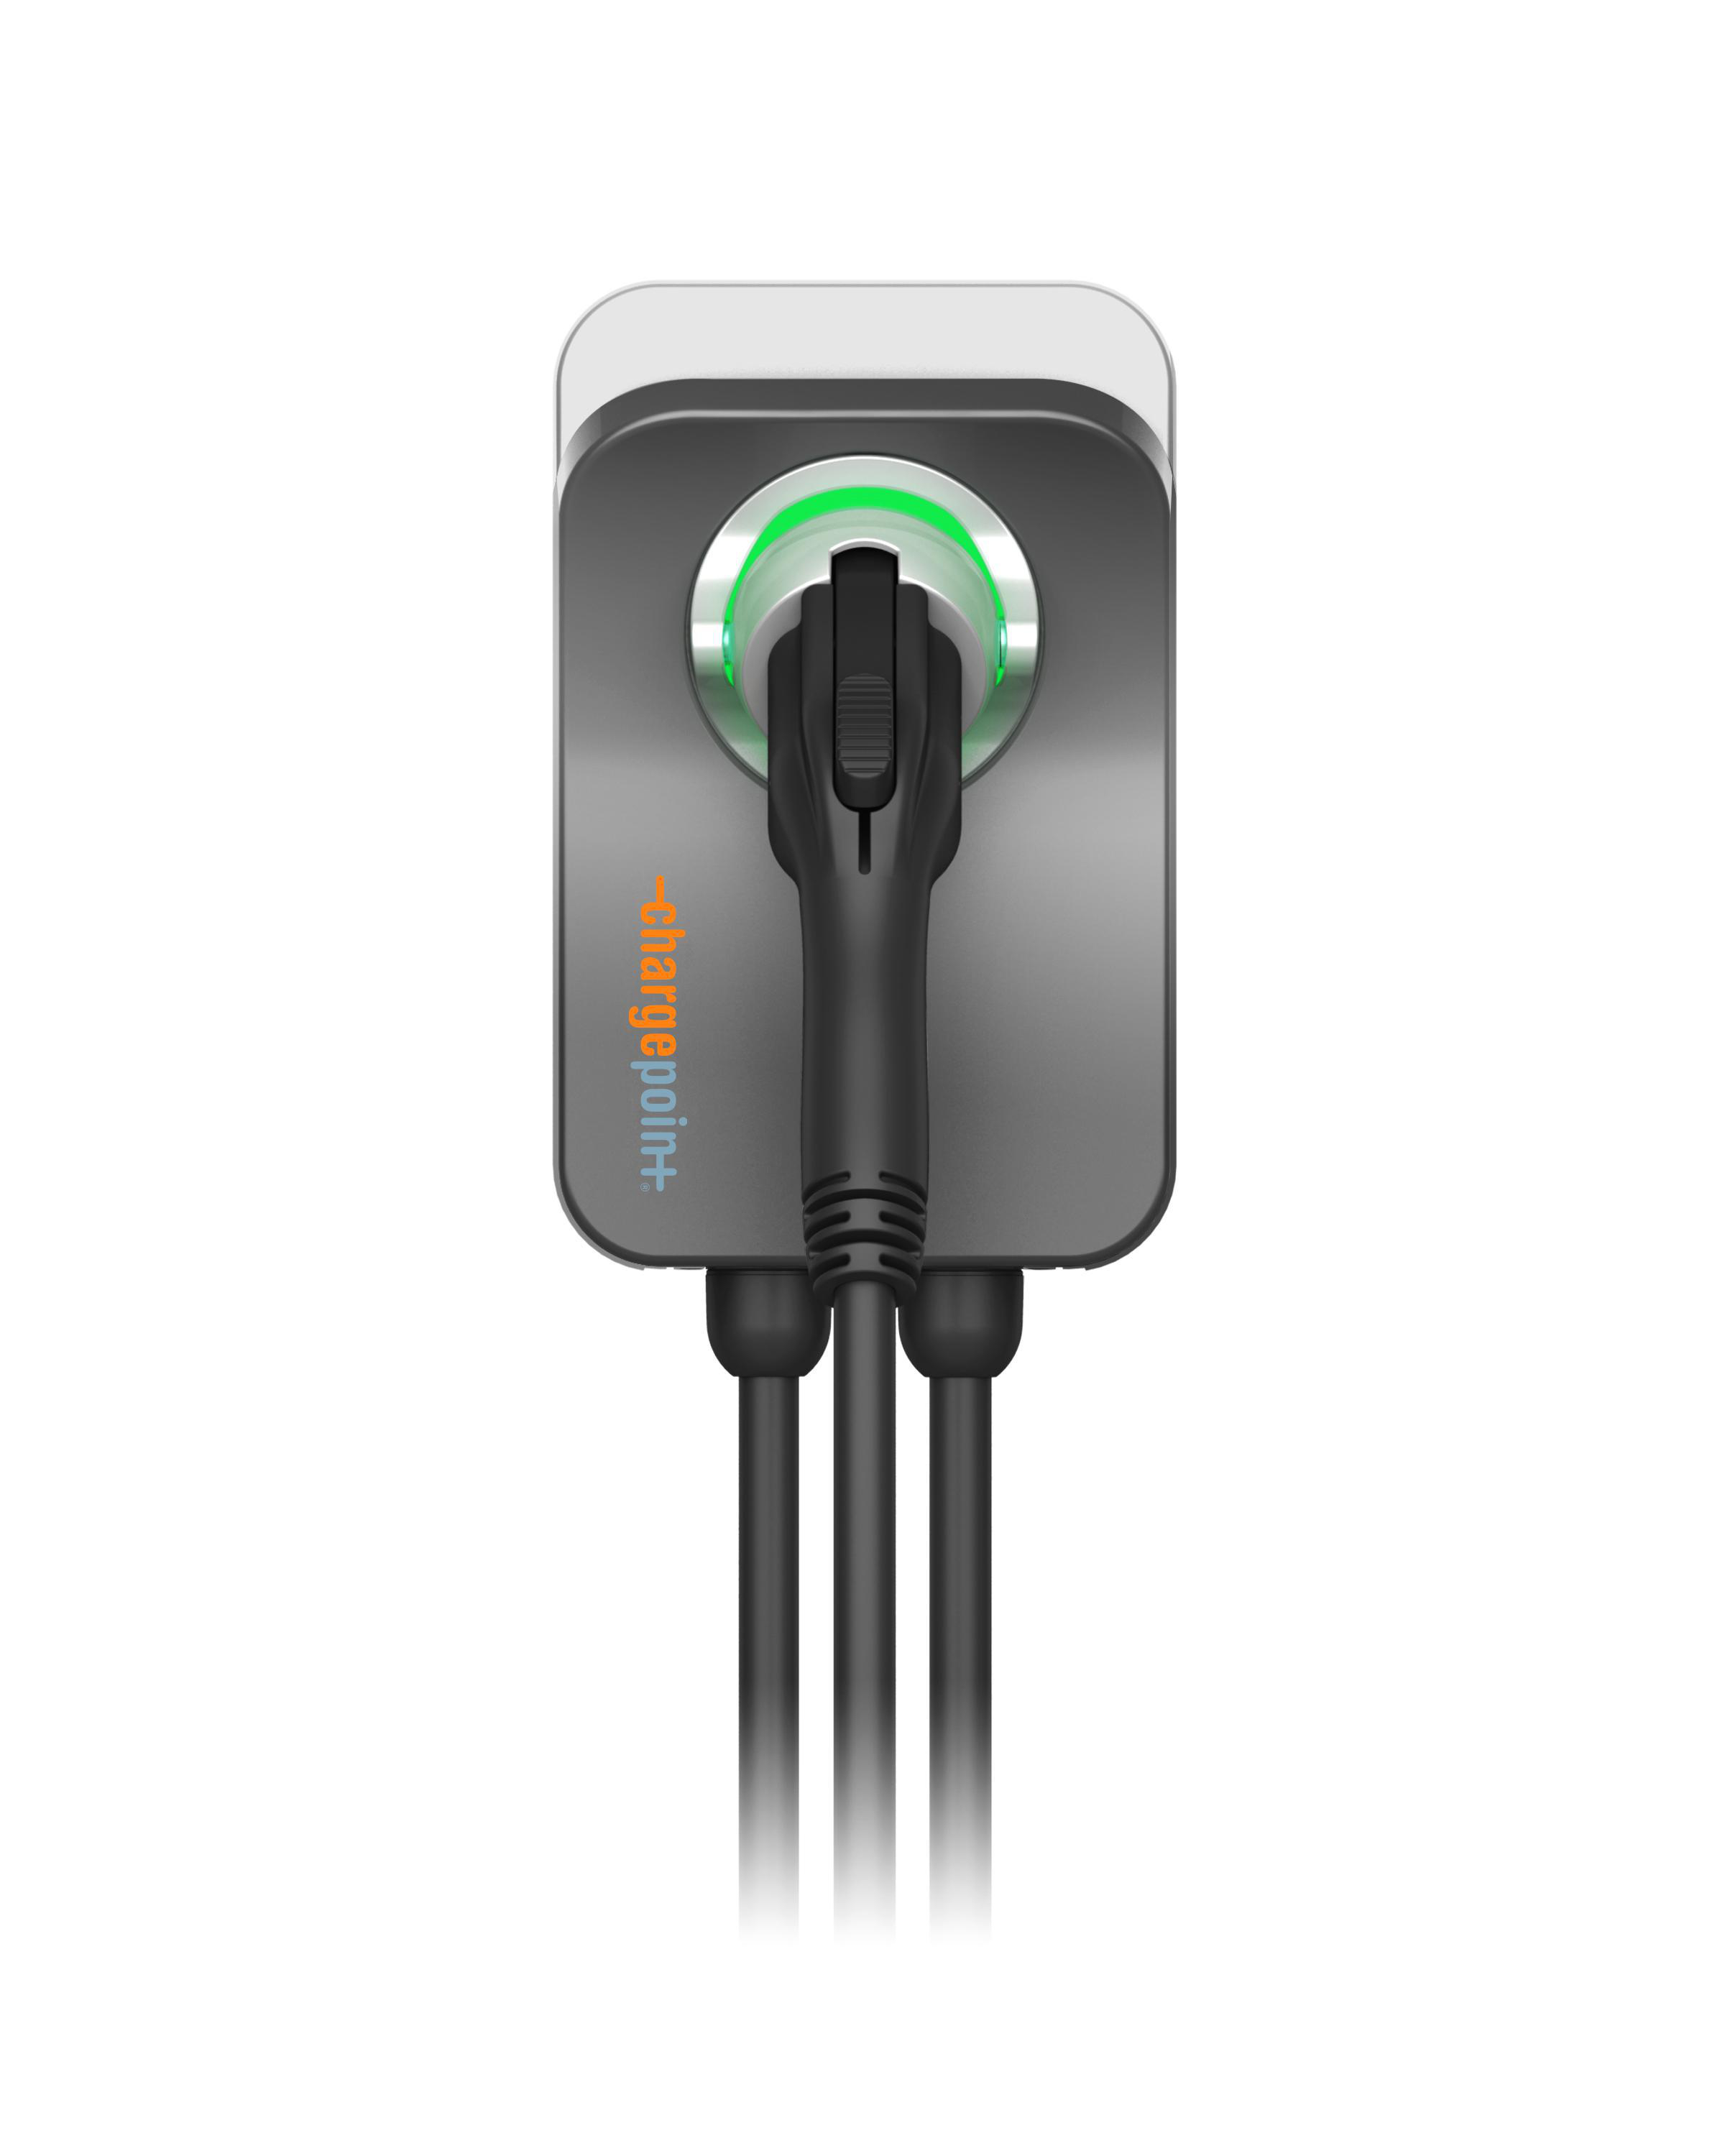 ChargePoint Home Flex Electric Vehicle (EV) Charger, 16 to 50 Amp, 240V, Level WiFi Enabled EVSE, UL Listed, ENERGY STAR, NEMA 14-50 Plug or Hardwir - 3